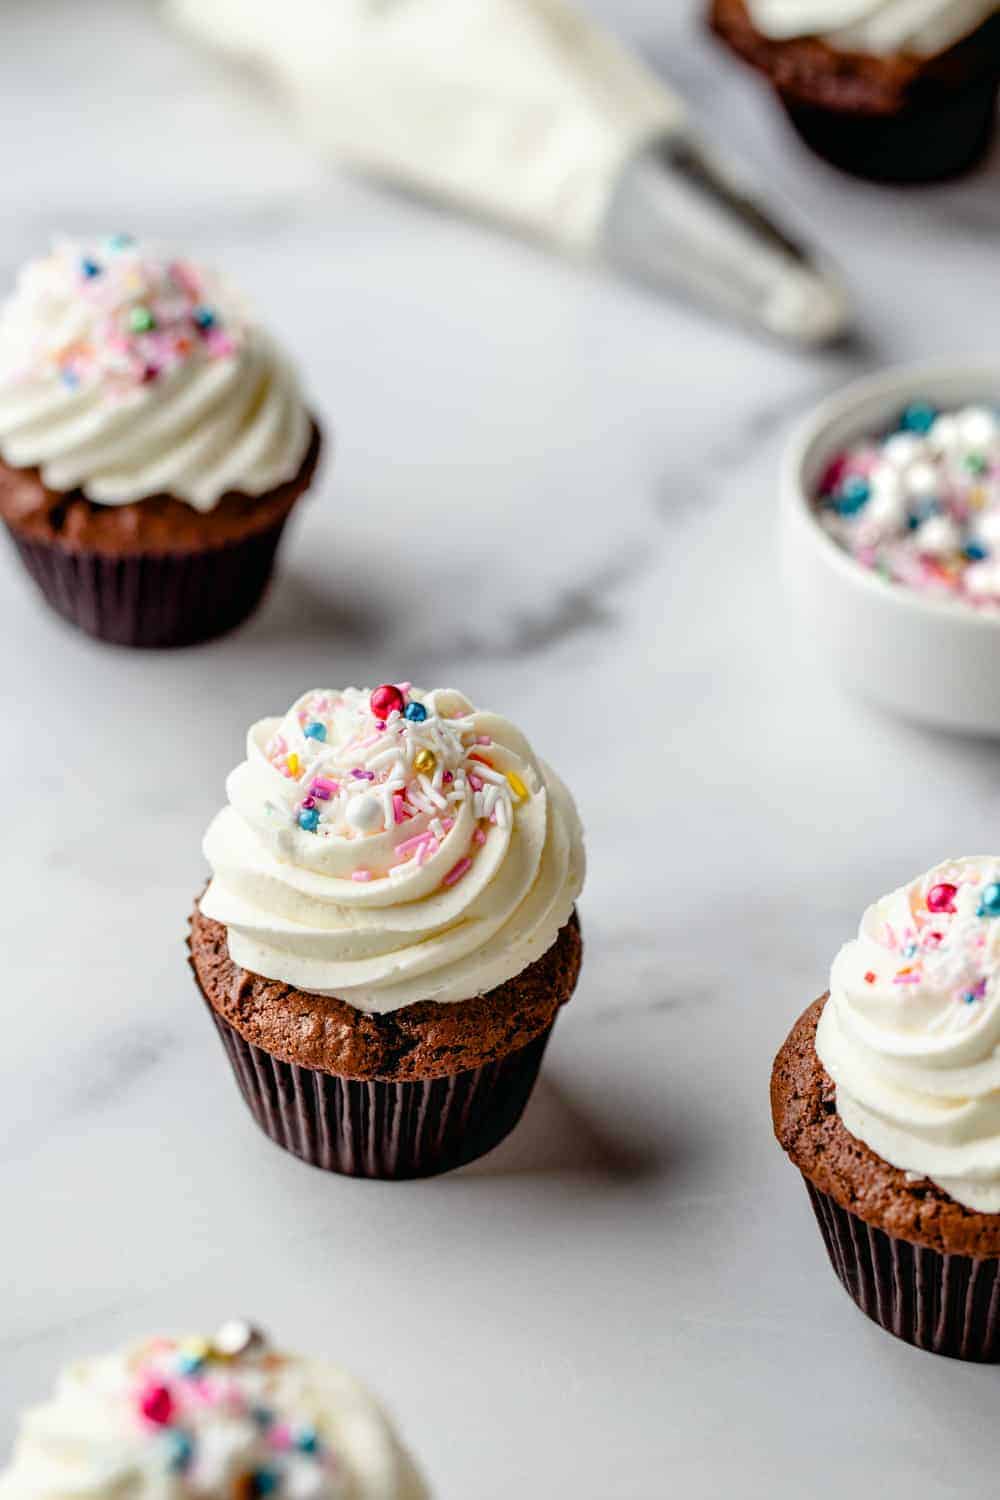 Homemade Buttercream Frosting is one of the best basic recipes to have on hand. This classic recipe makes enough pillowy frosting for 24 cupcakes or a 9-inch layer cake.